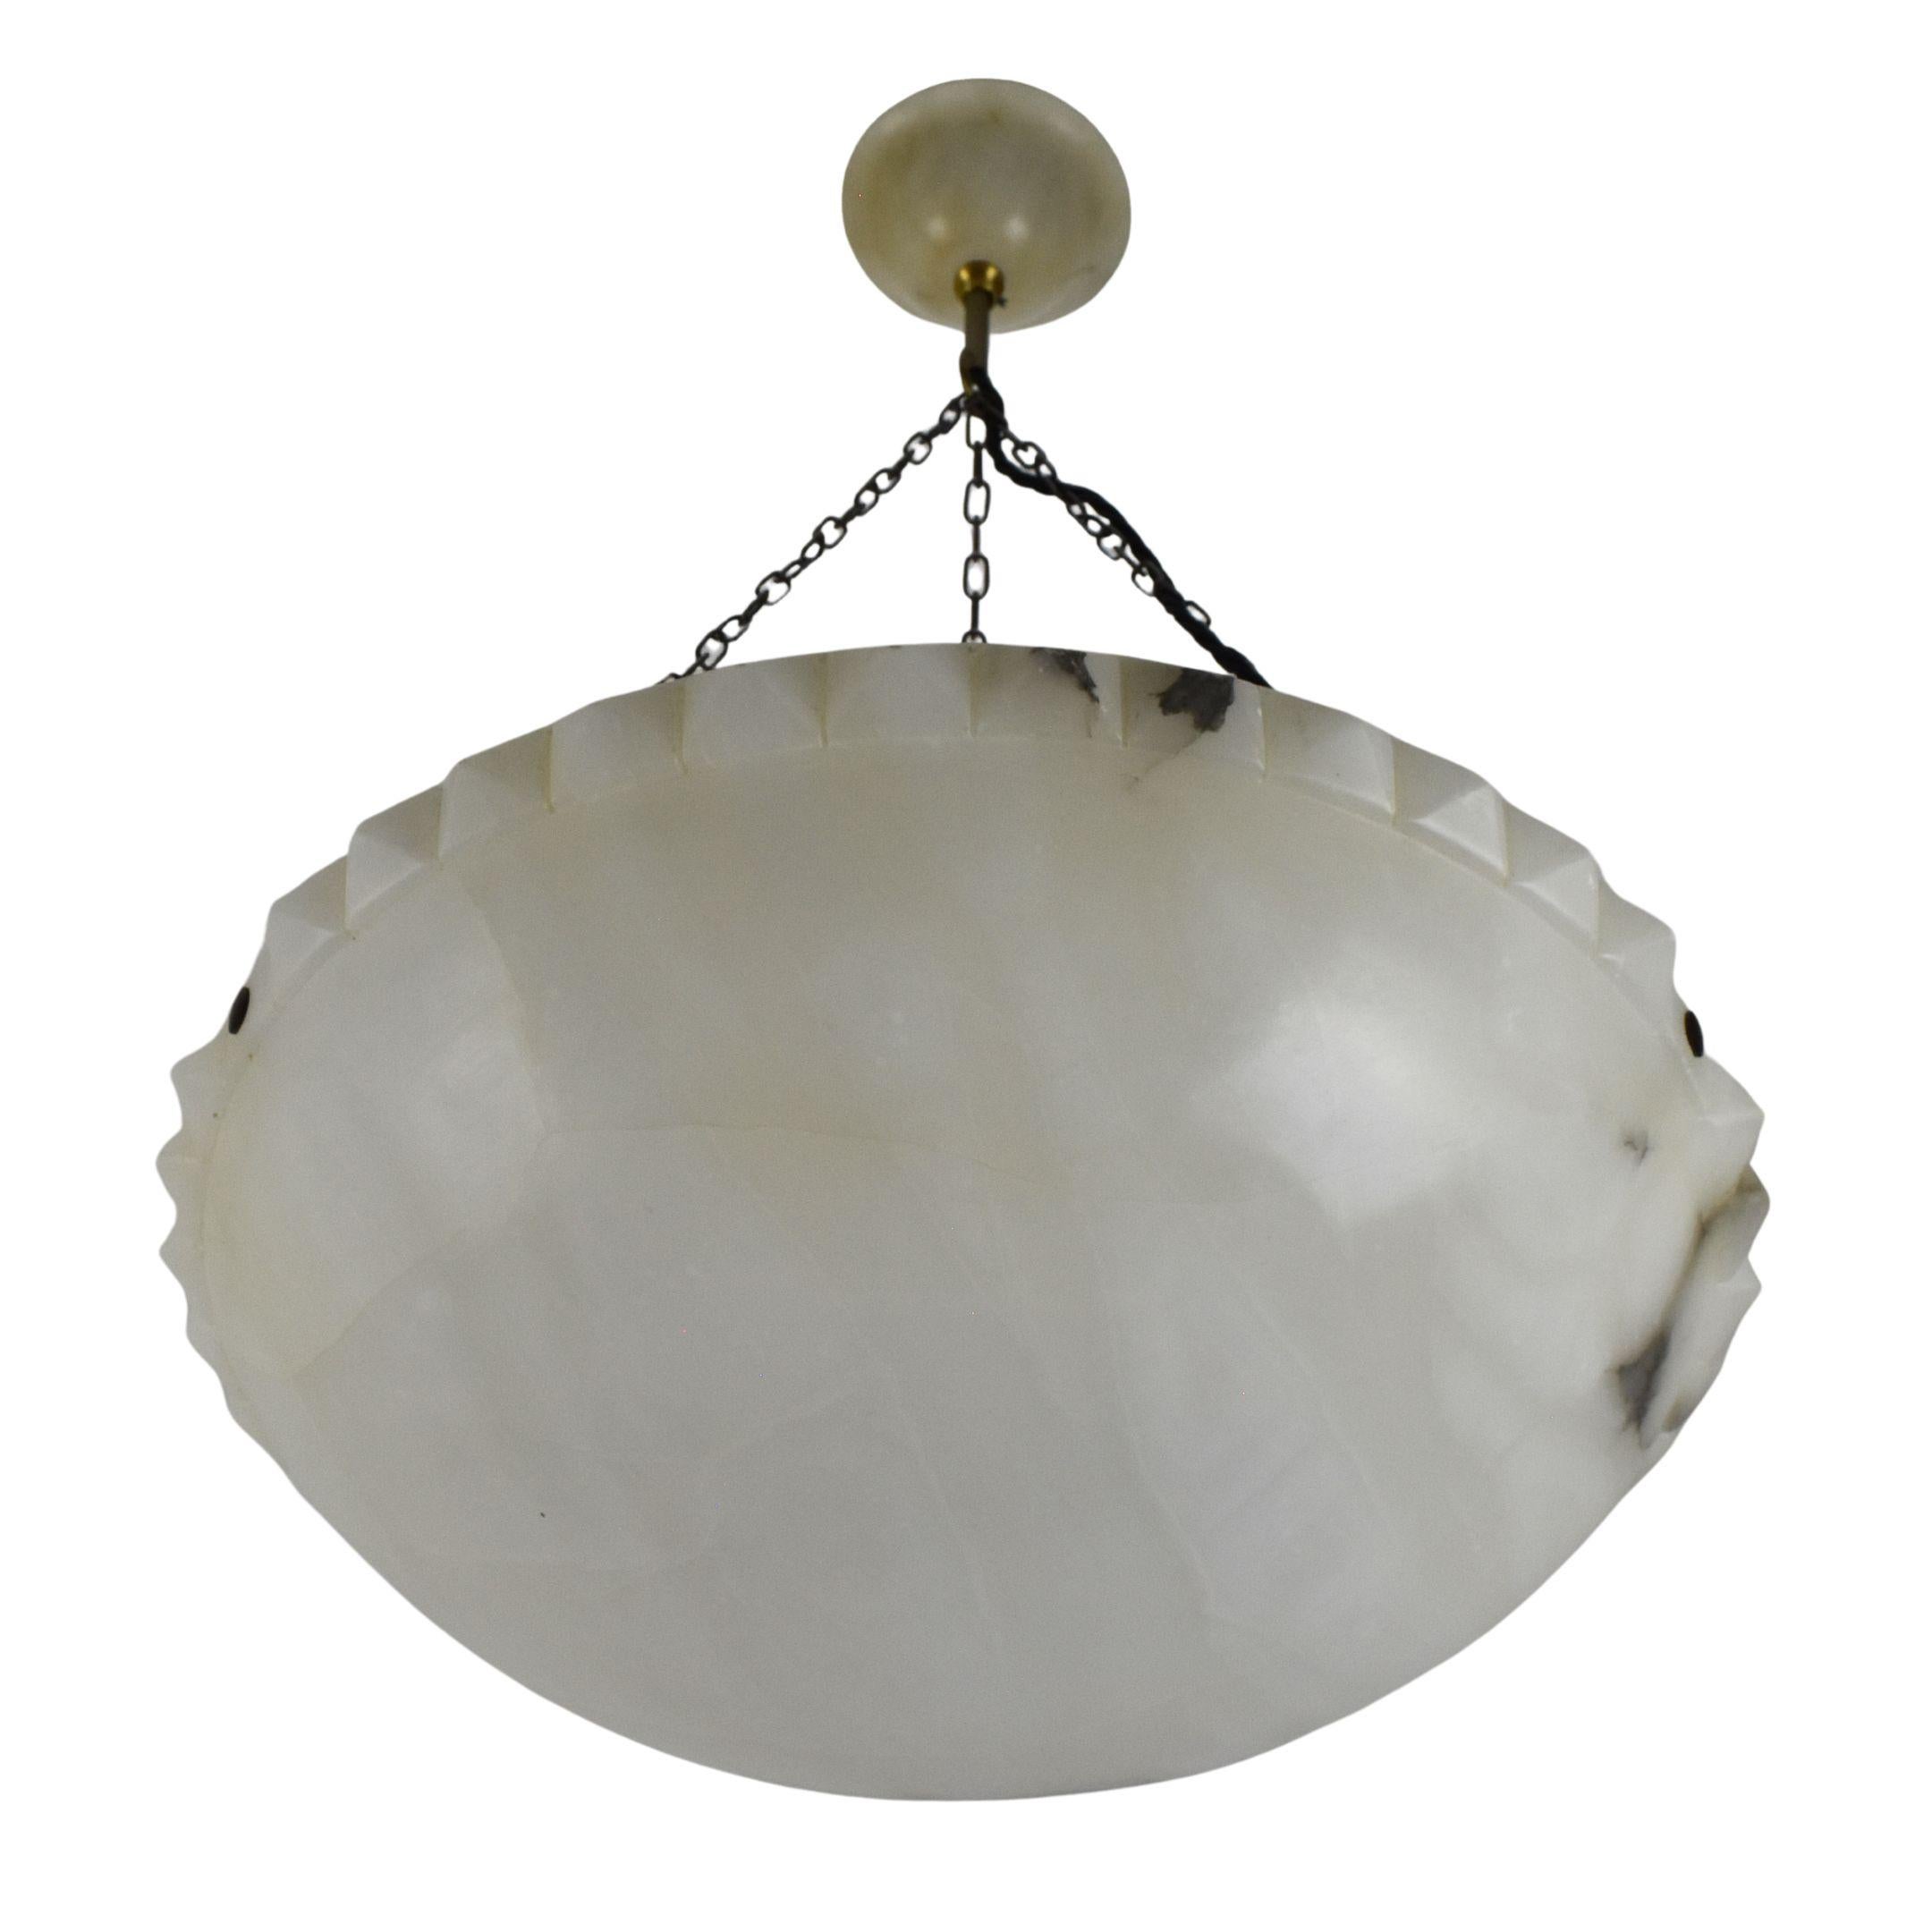 Hand-Crafted Large Hobnailed Art Deco Bright Alabaster Pendant Light Ceiling Fixture Lamp